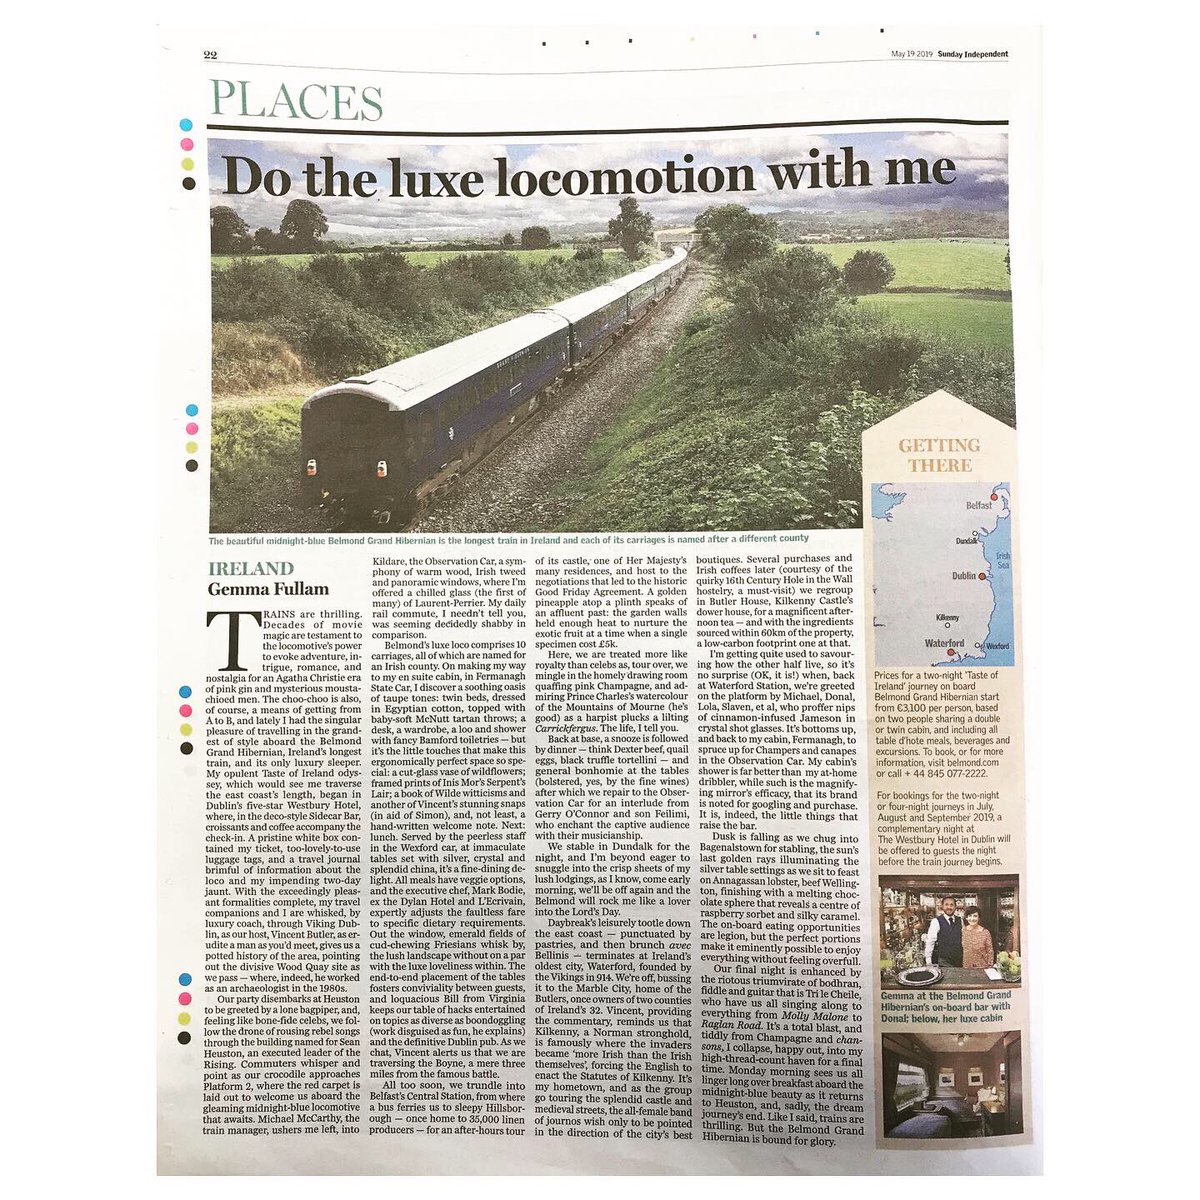 Some lovely pieces over the weekend on the stunning @belmond #GrandHibernian #luxurytrain in @sundaybusiness Magazine and @TheSundayIndo #Living 🚂 #travel #luxurytravel